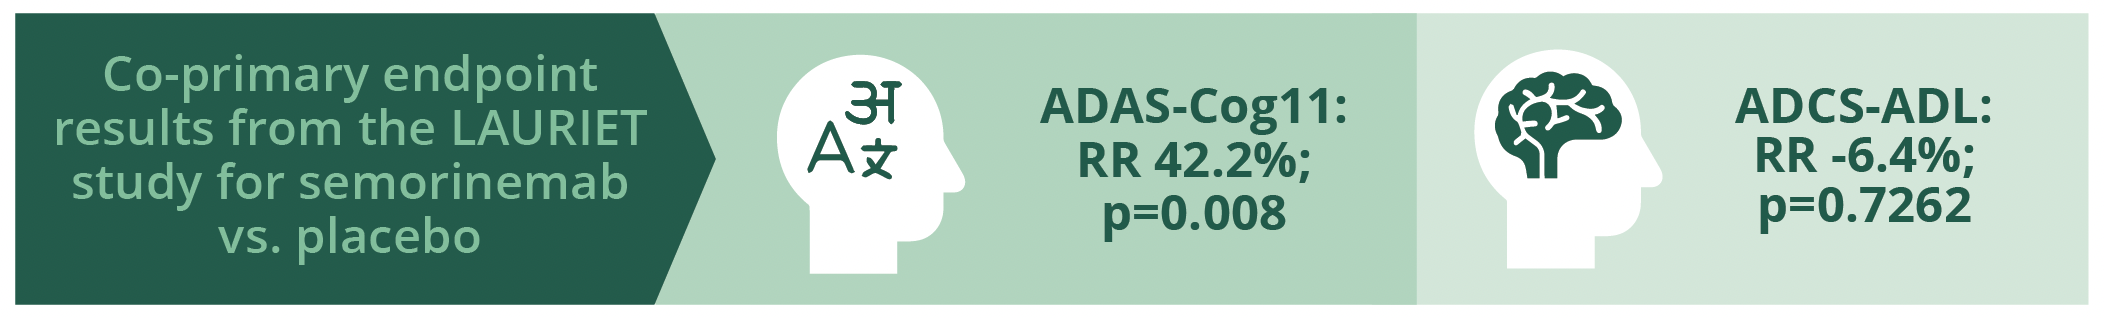 Semorinemab significantly reduced the rate of cognitive decline as measured by ADAS-Cog11, but had no significant effect on ADCS-ADL in the LAURIET study